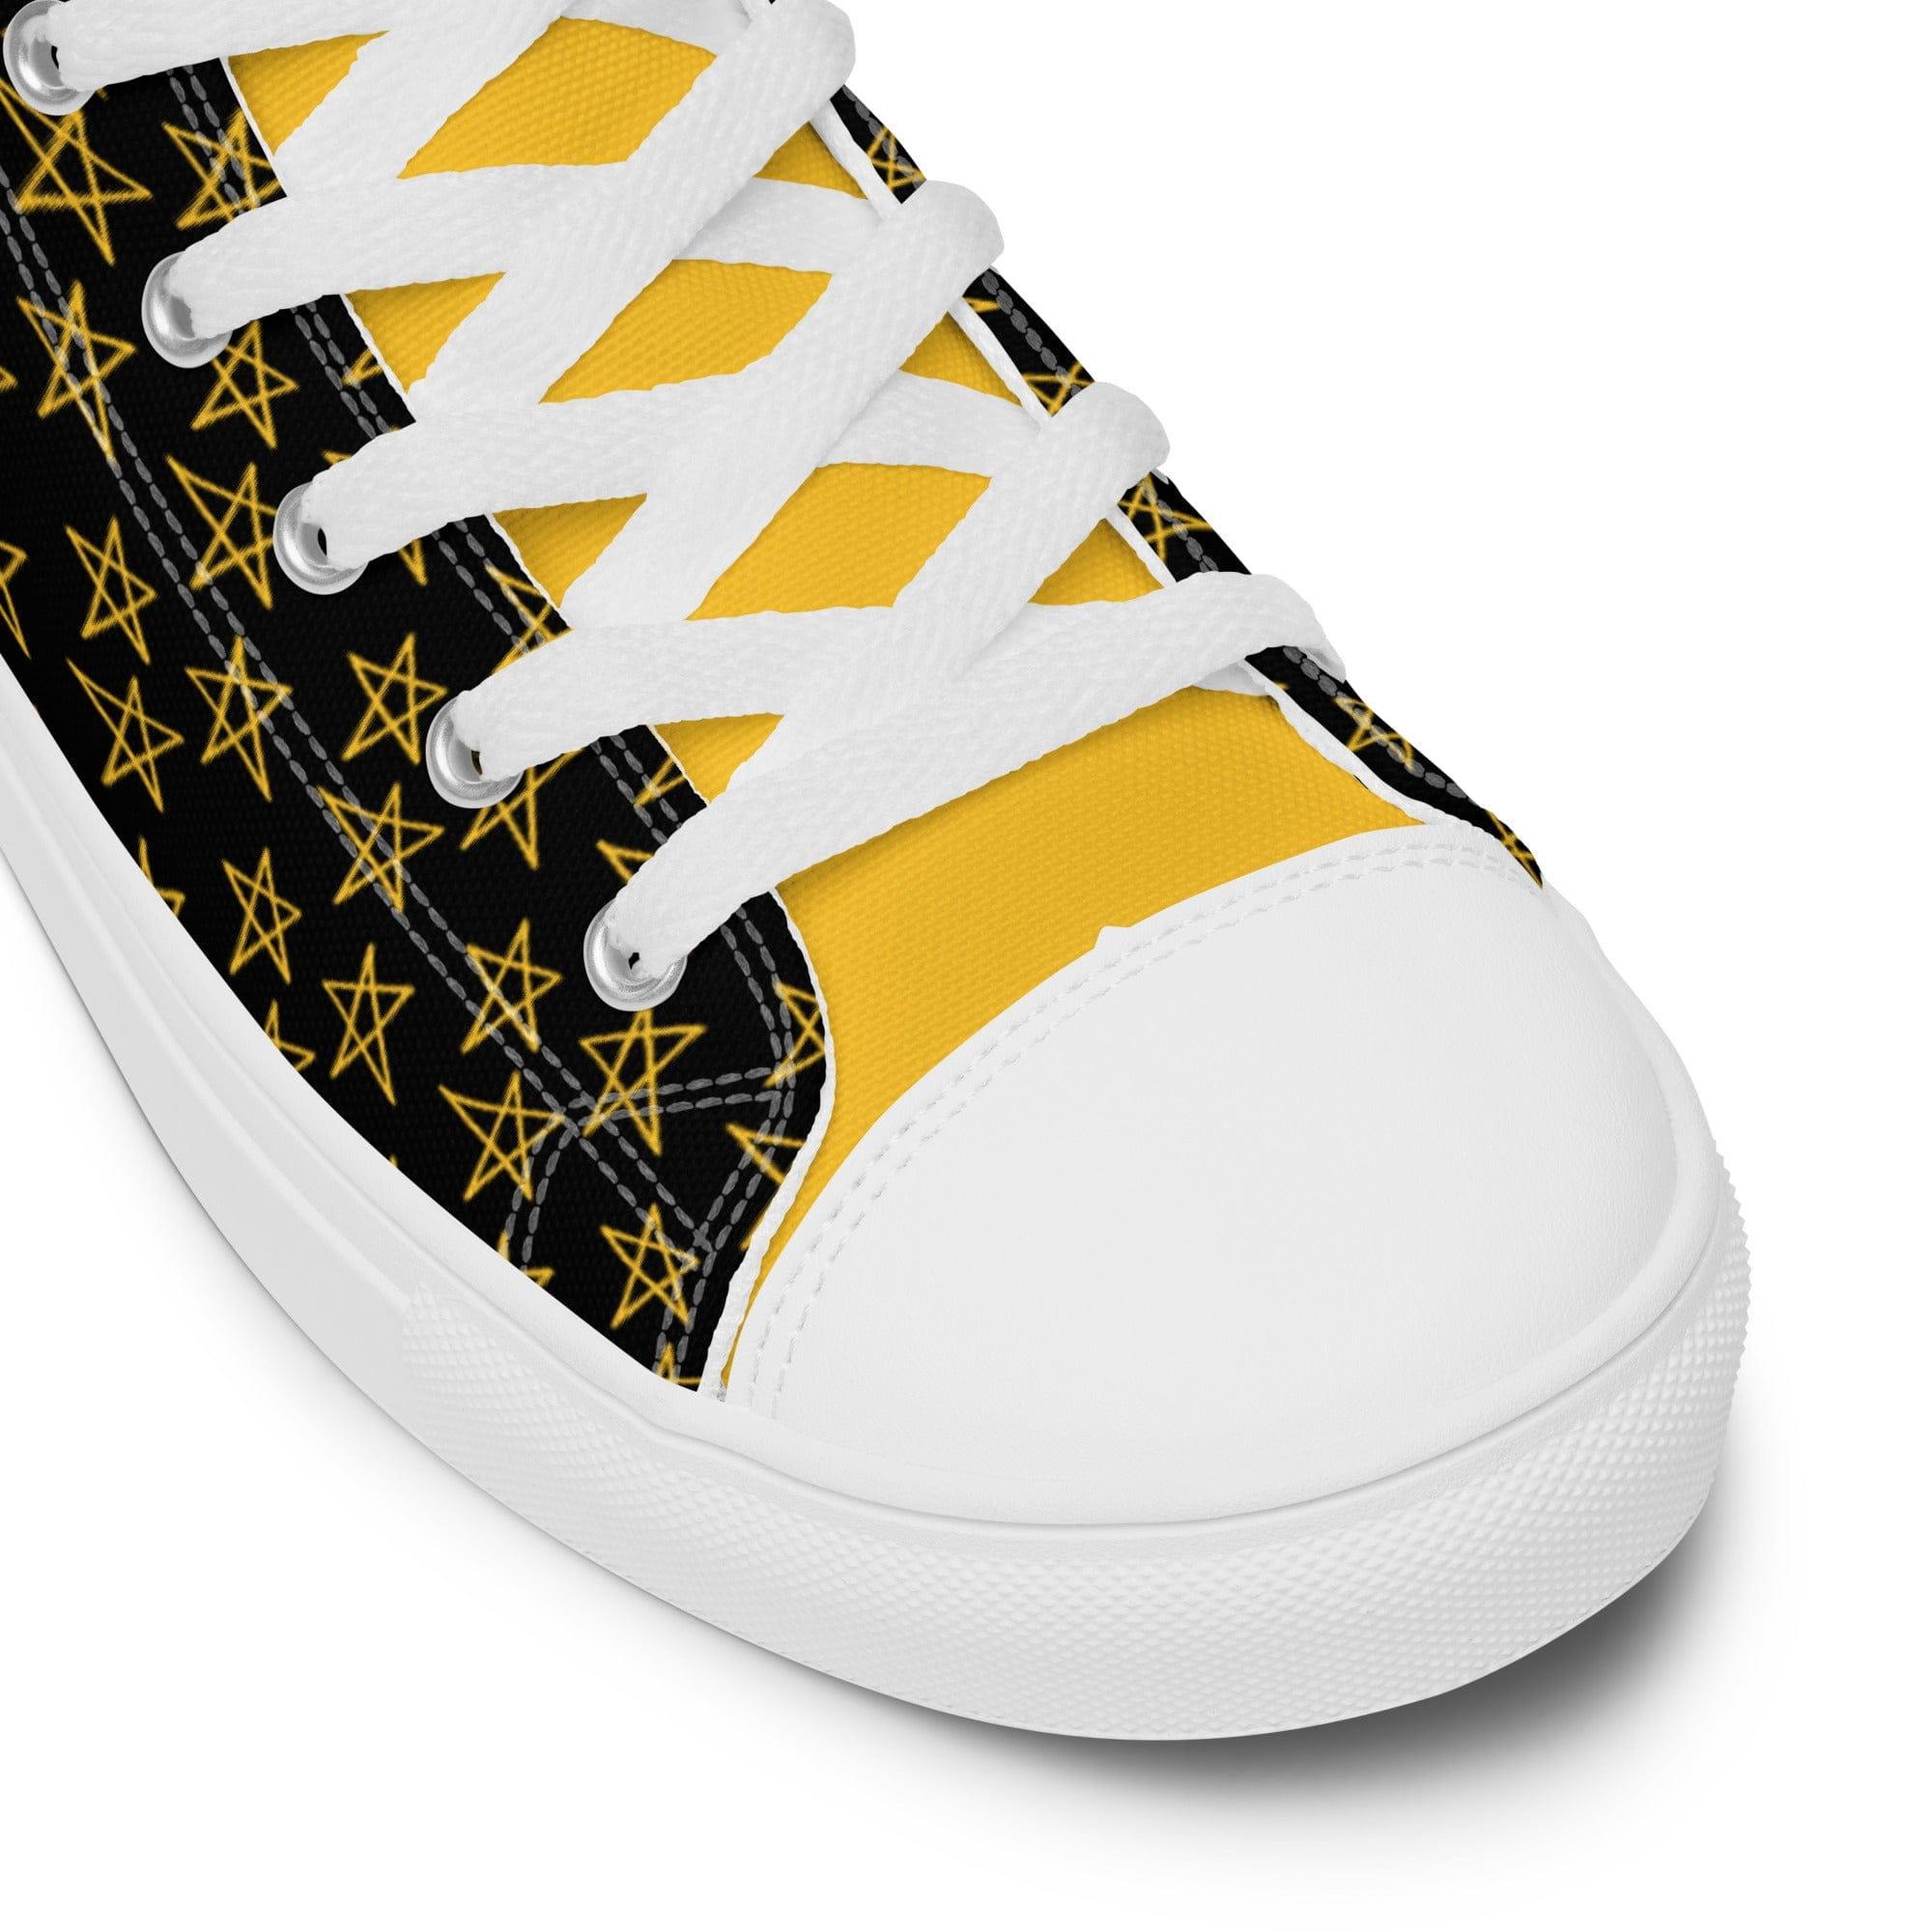 mo.be starboy high top canvas shoes - mo.be